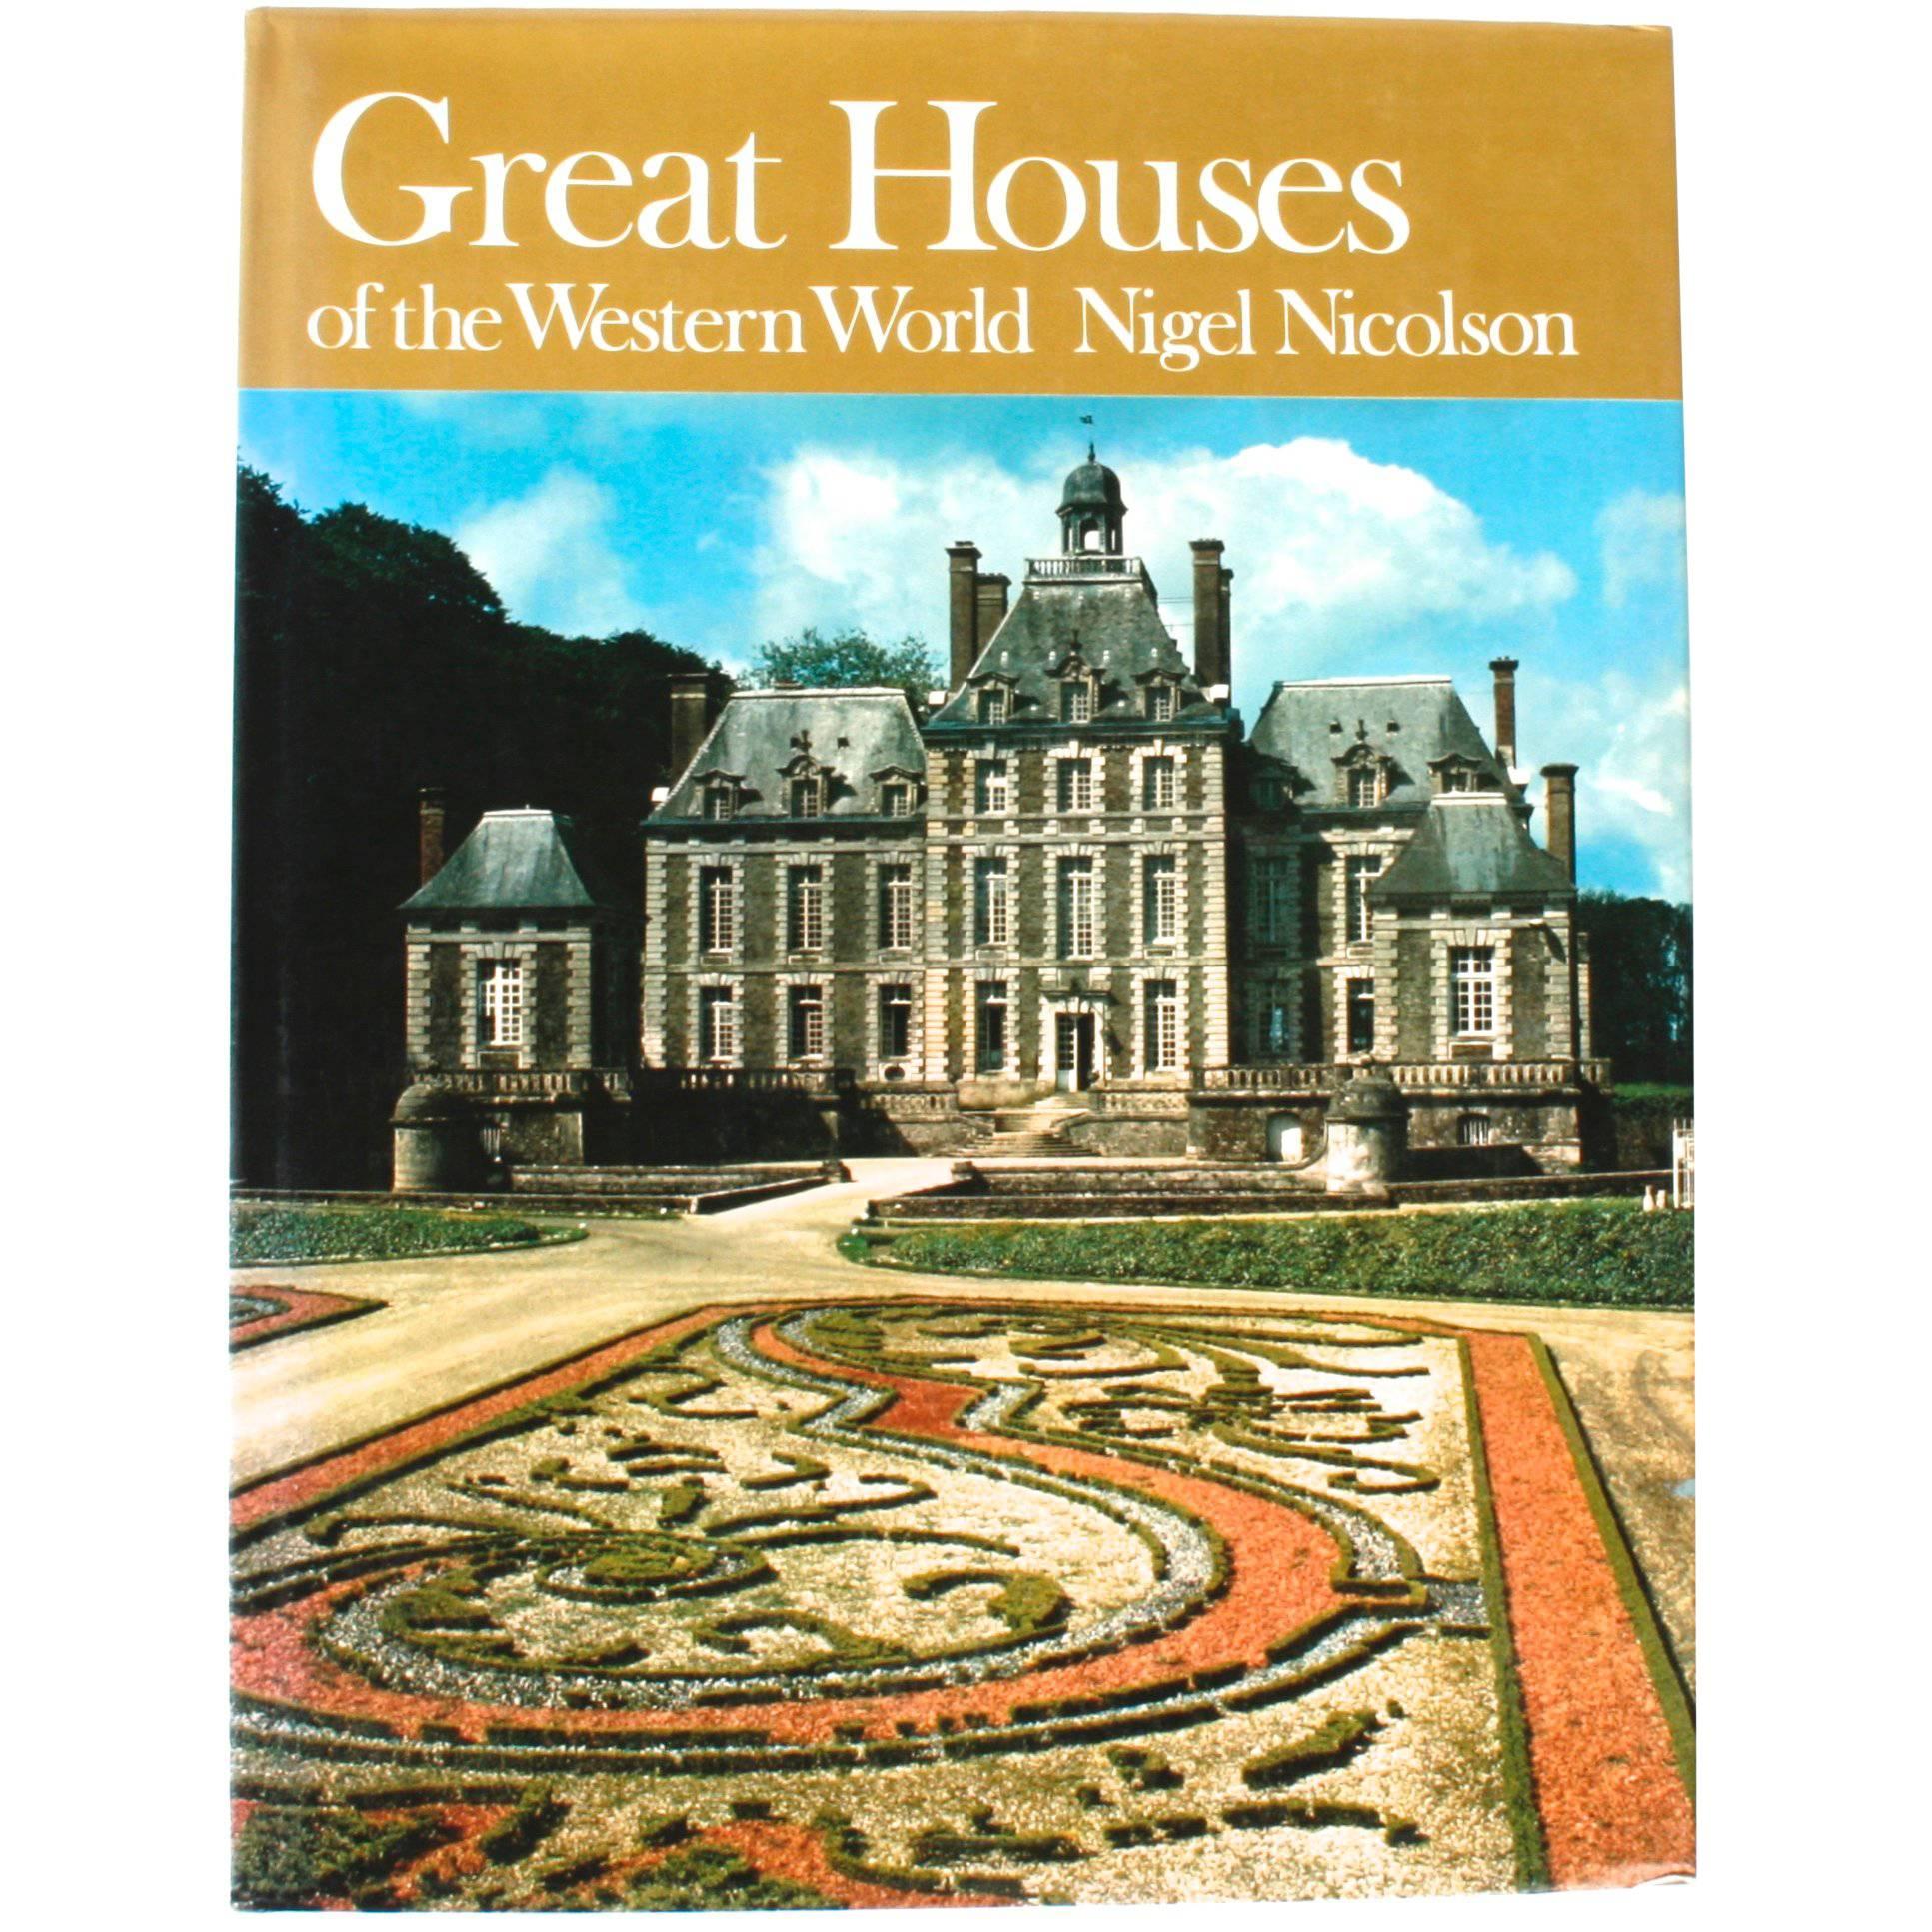 Great Houses of the Western World by Nigel Nicolson